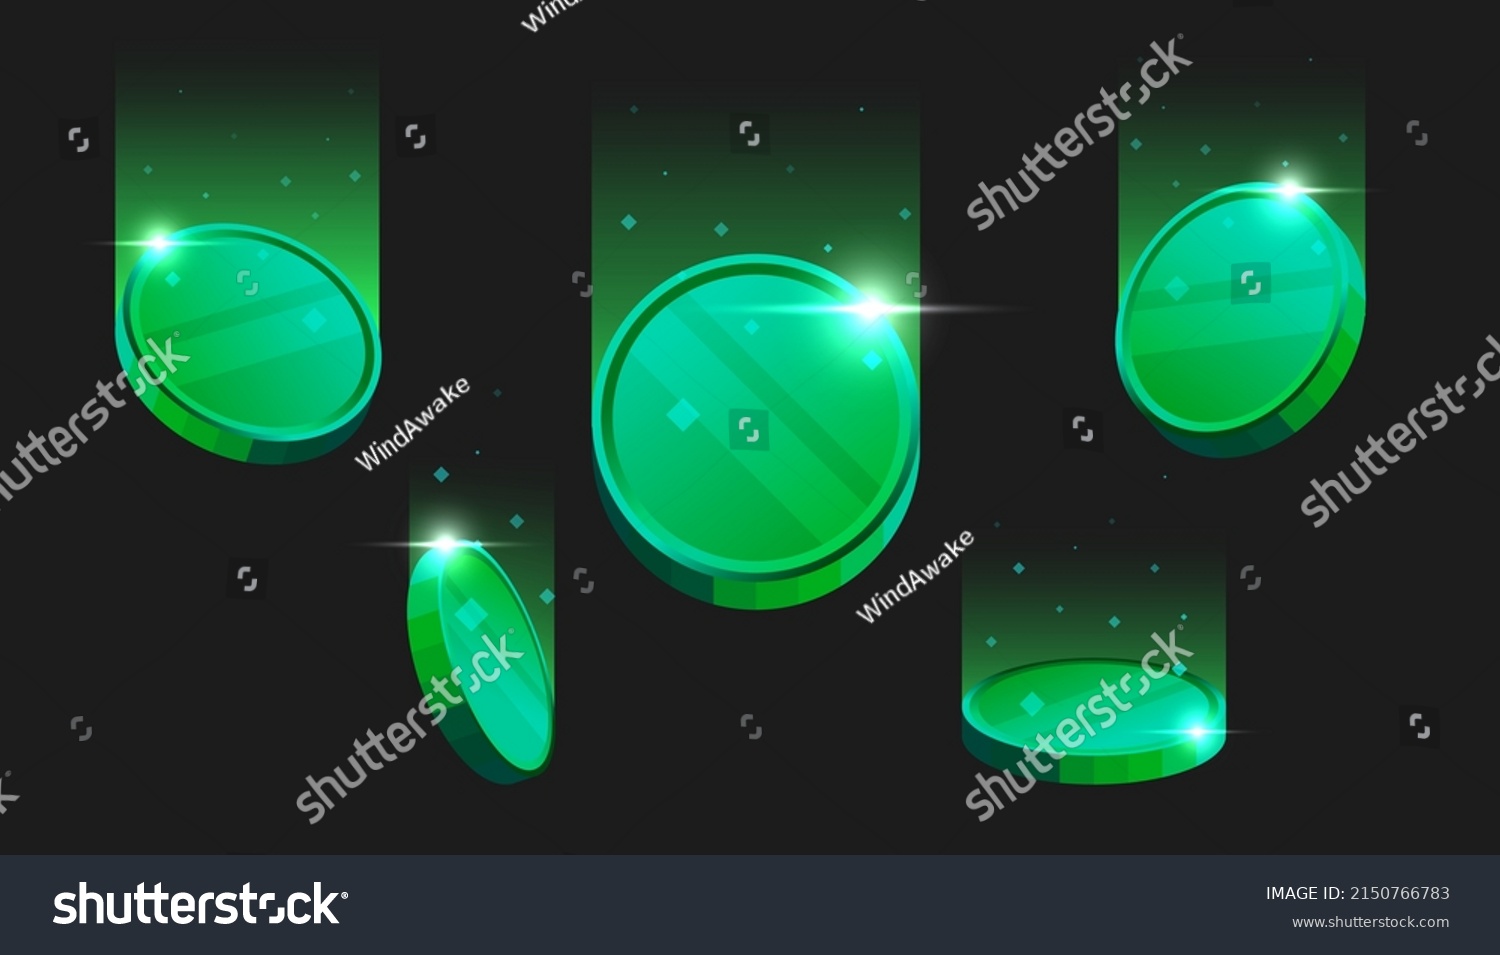 SVG of Blank green cryptocurrency coins falling on dark background. svg